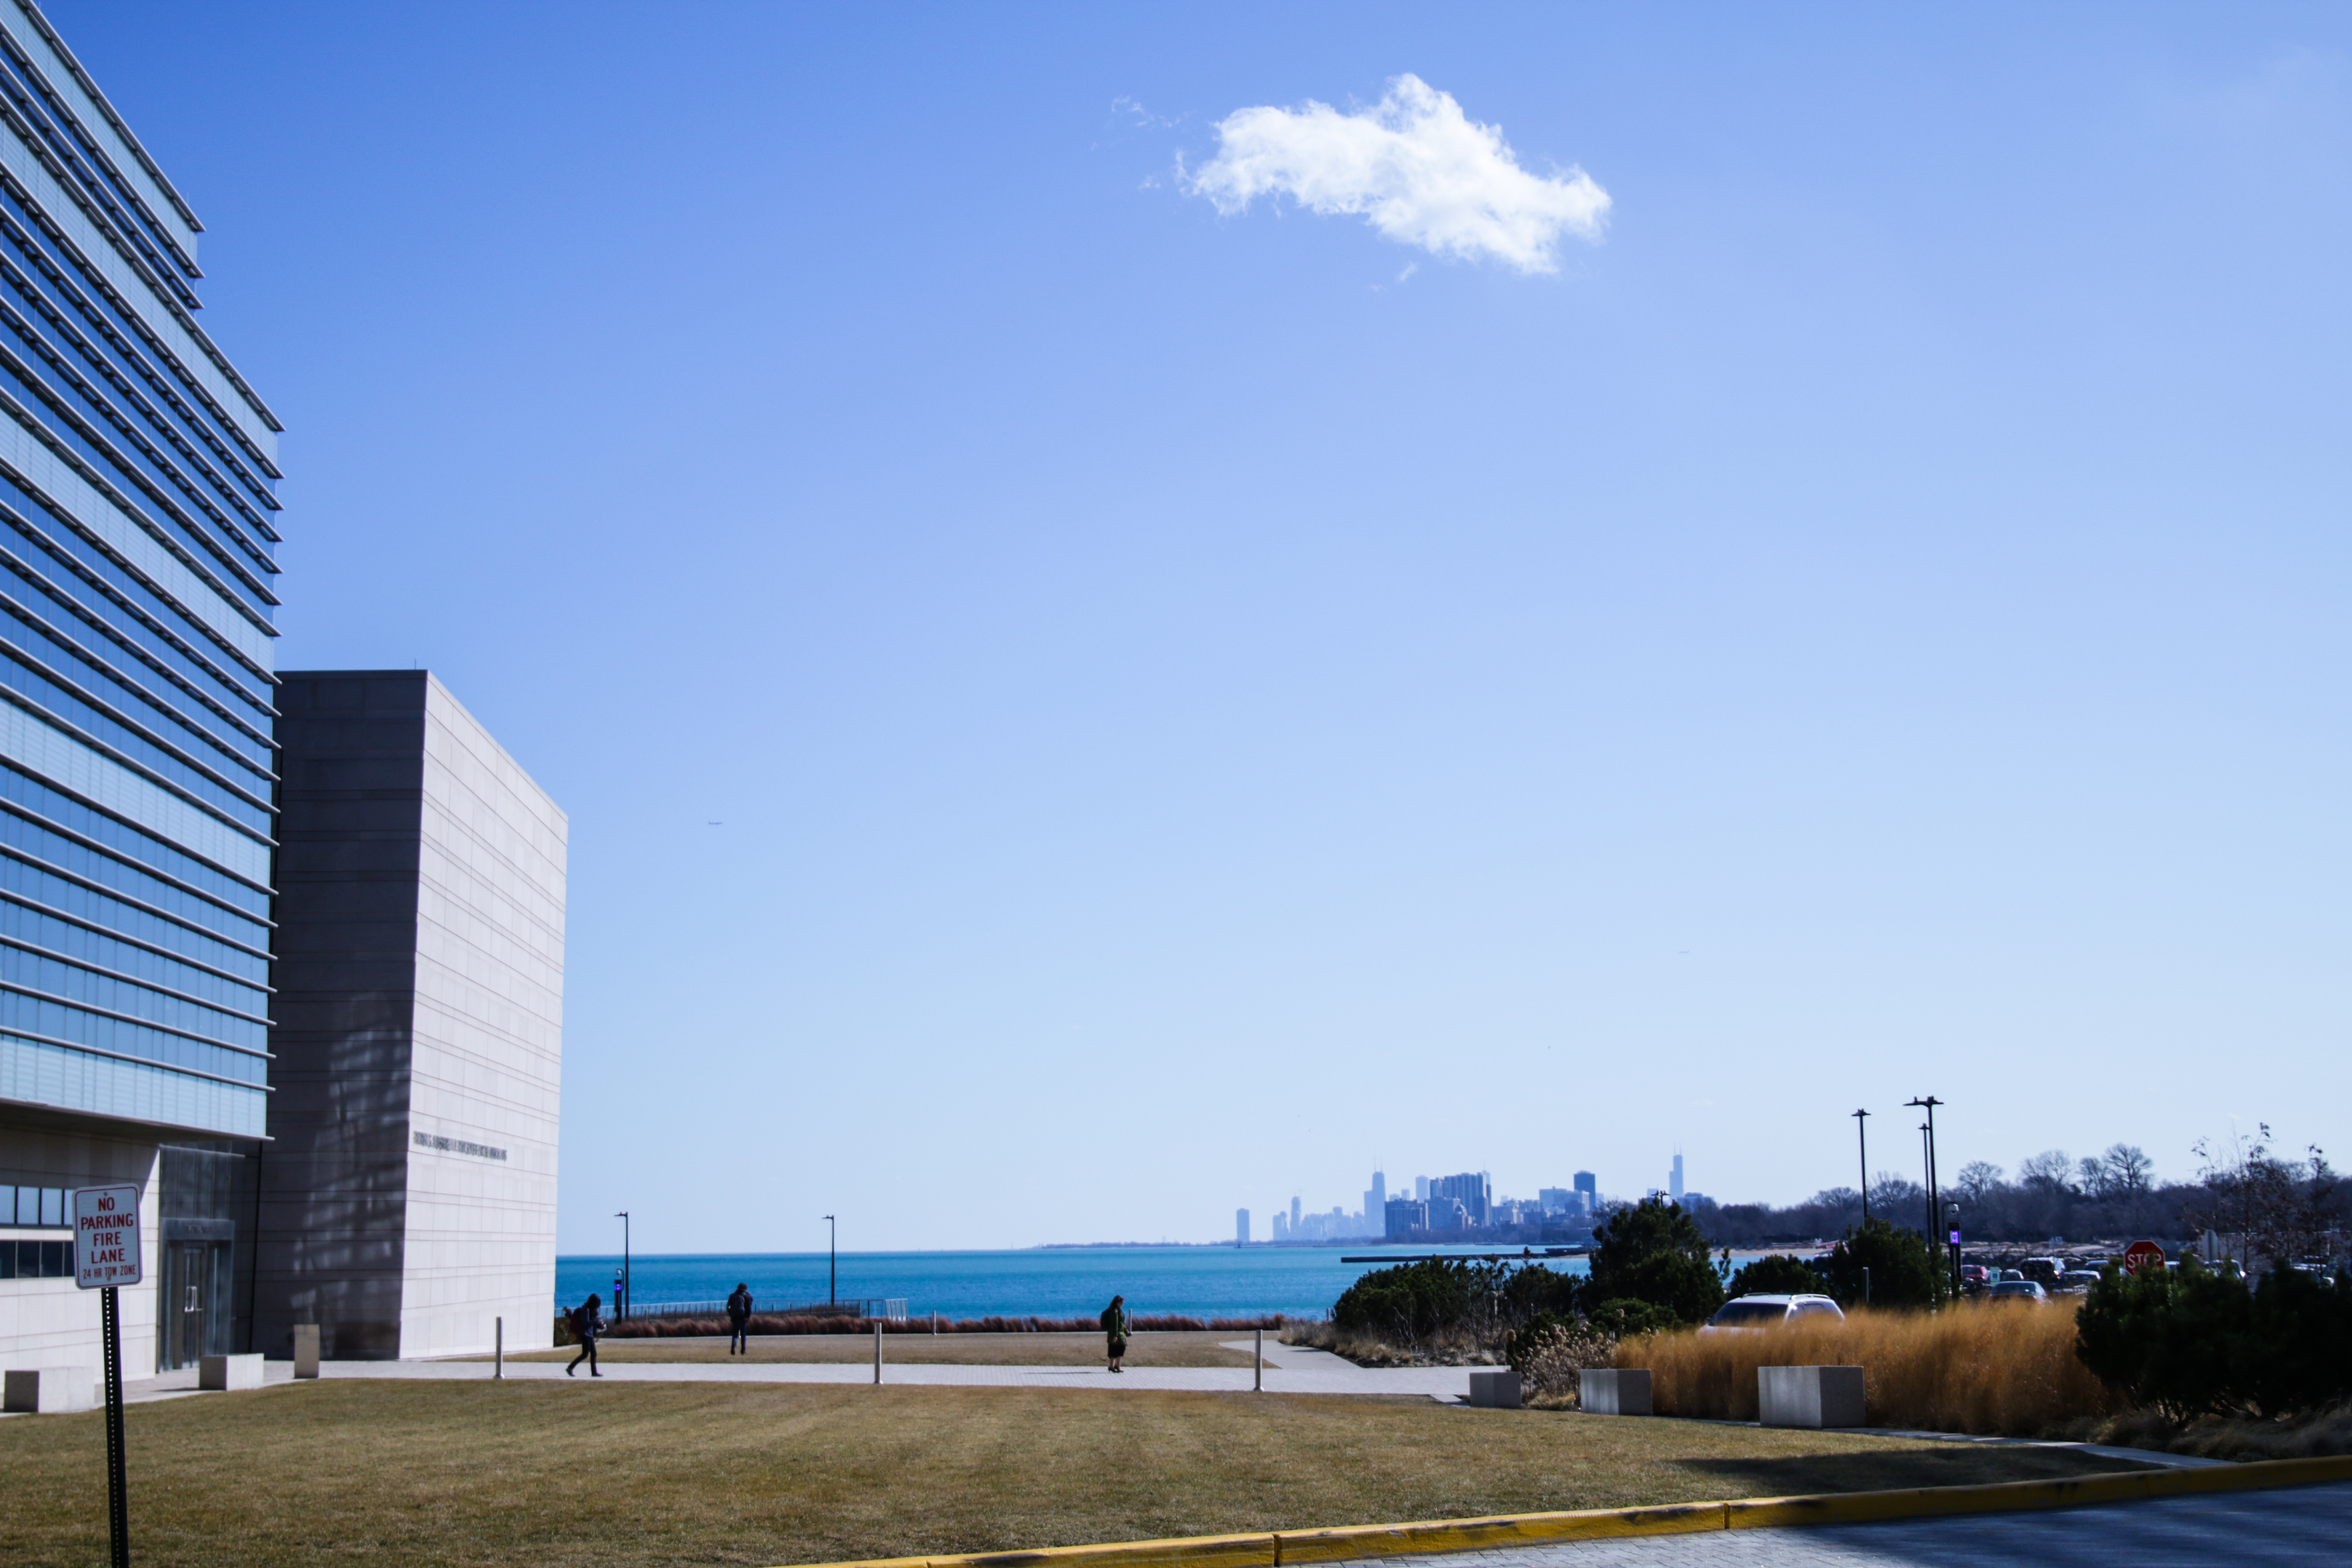 View of Chicago from the Evanston campus